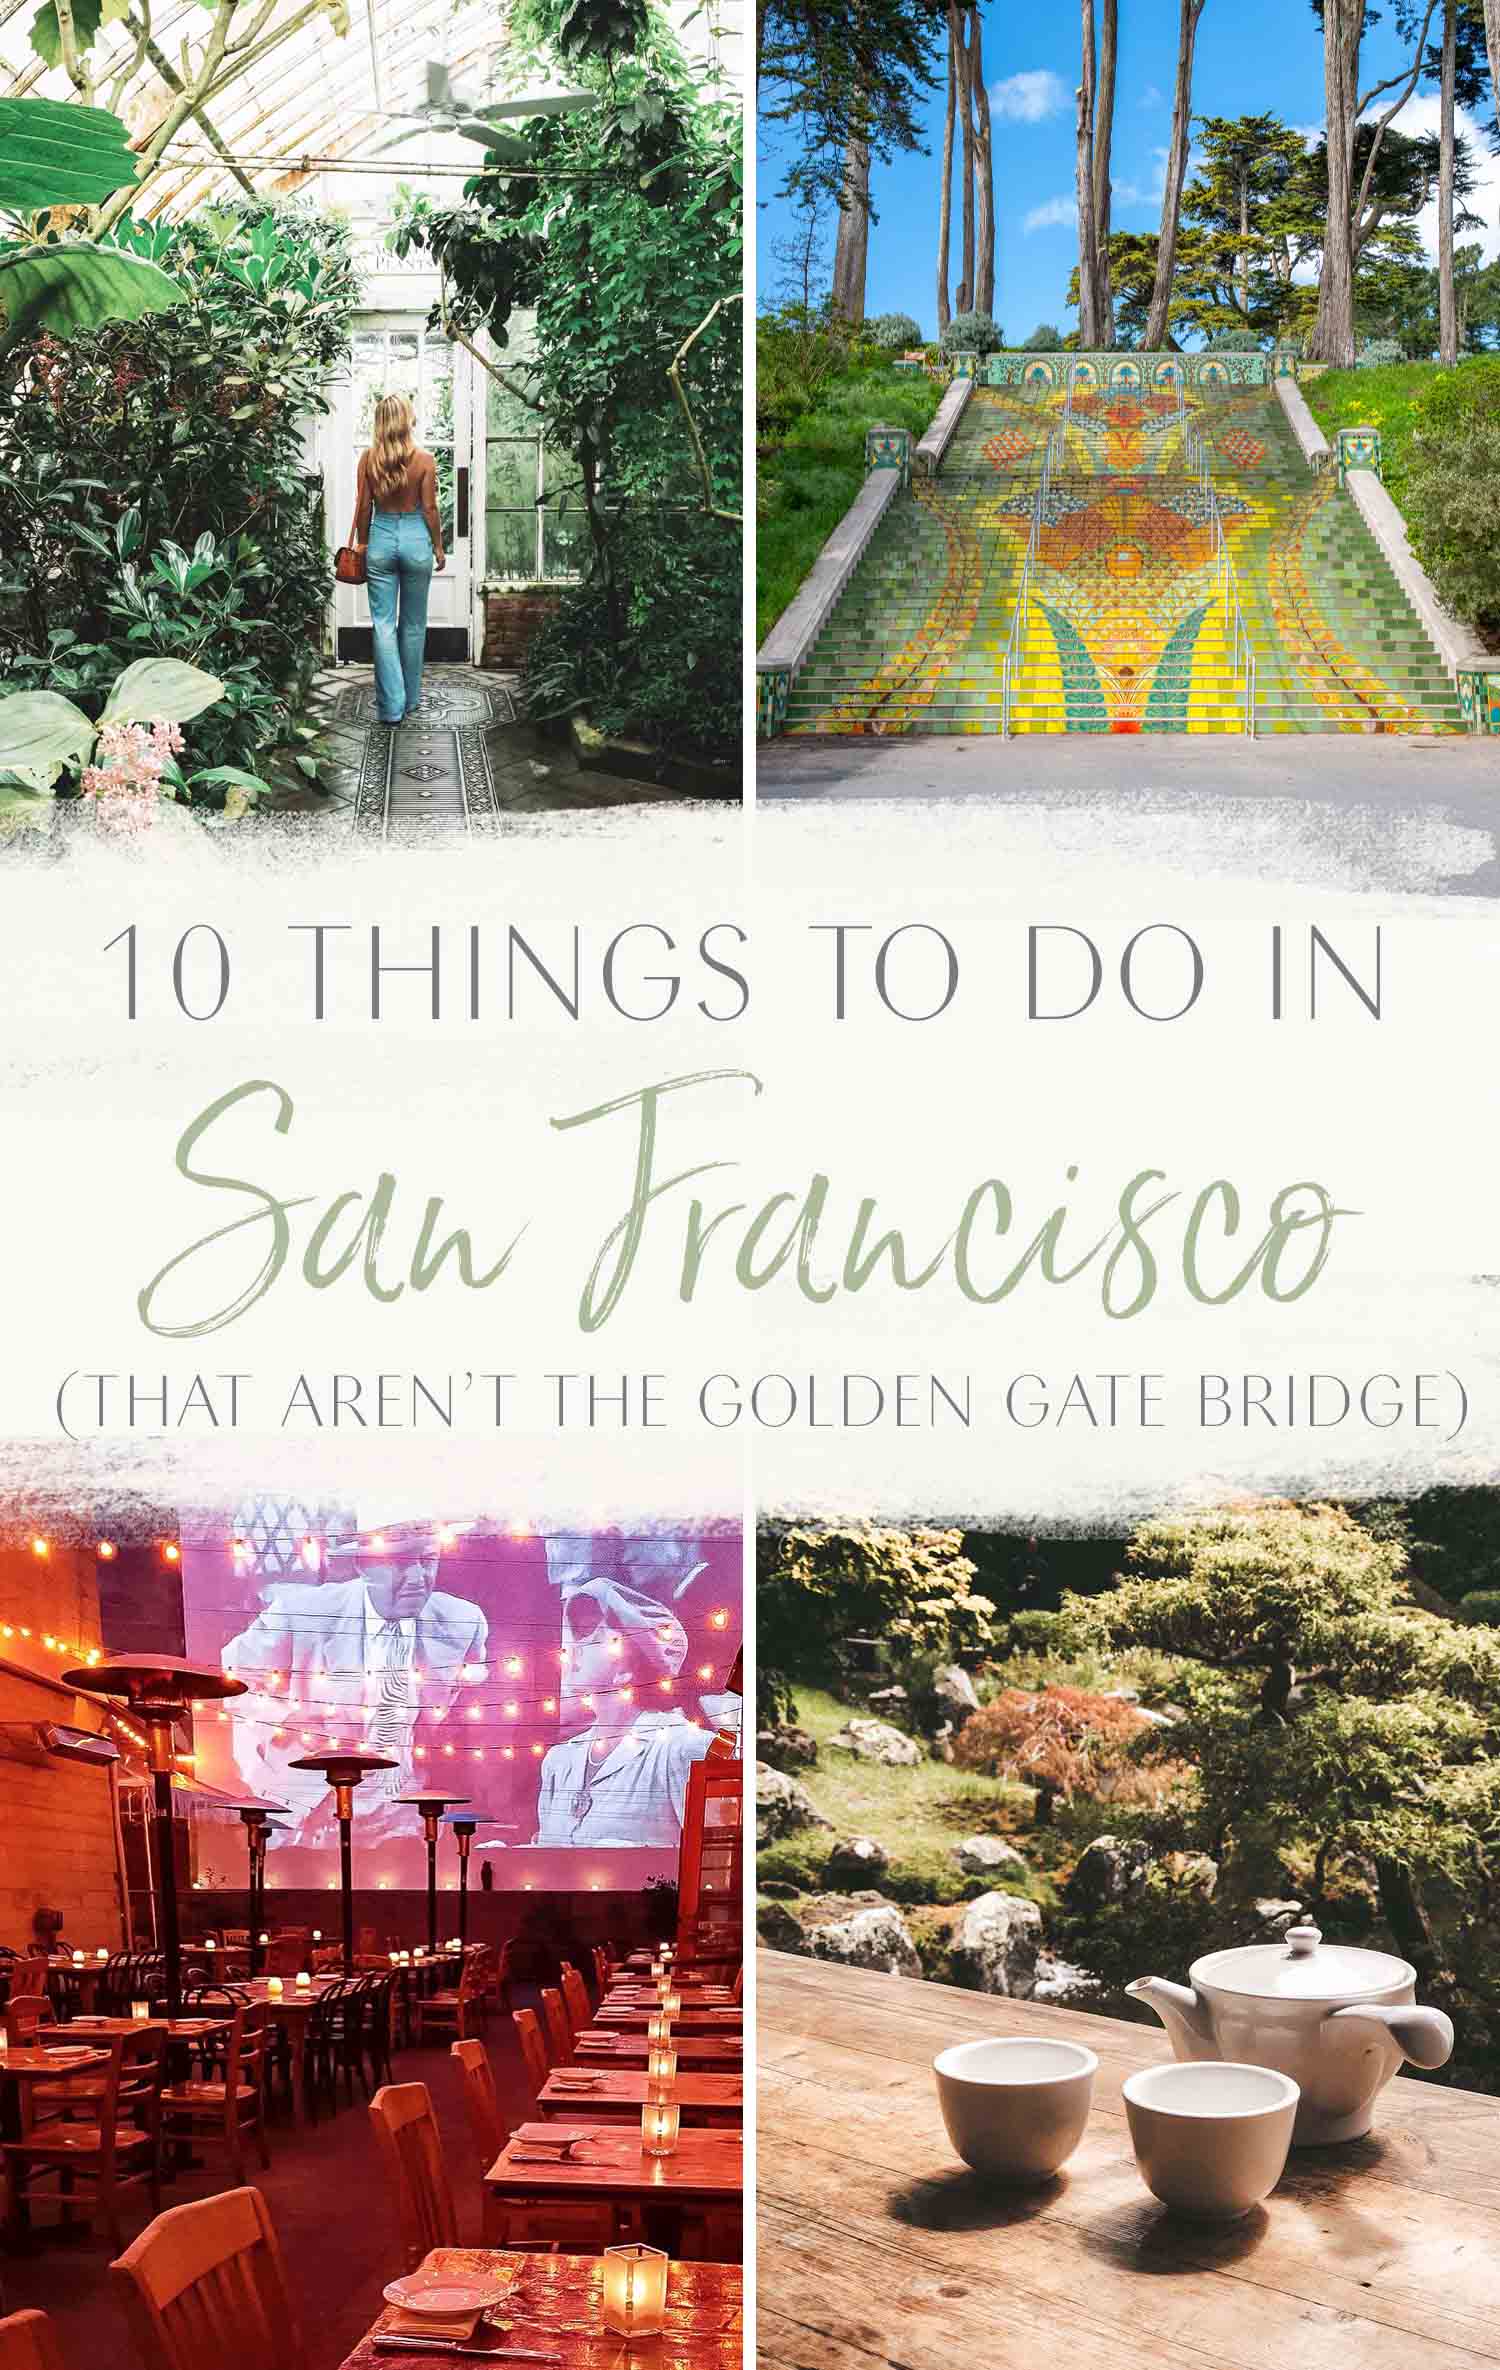 10 Things to Do in San Francisco